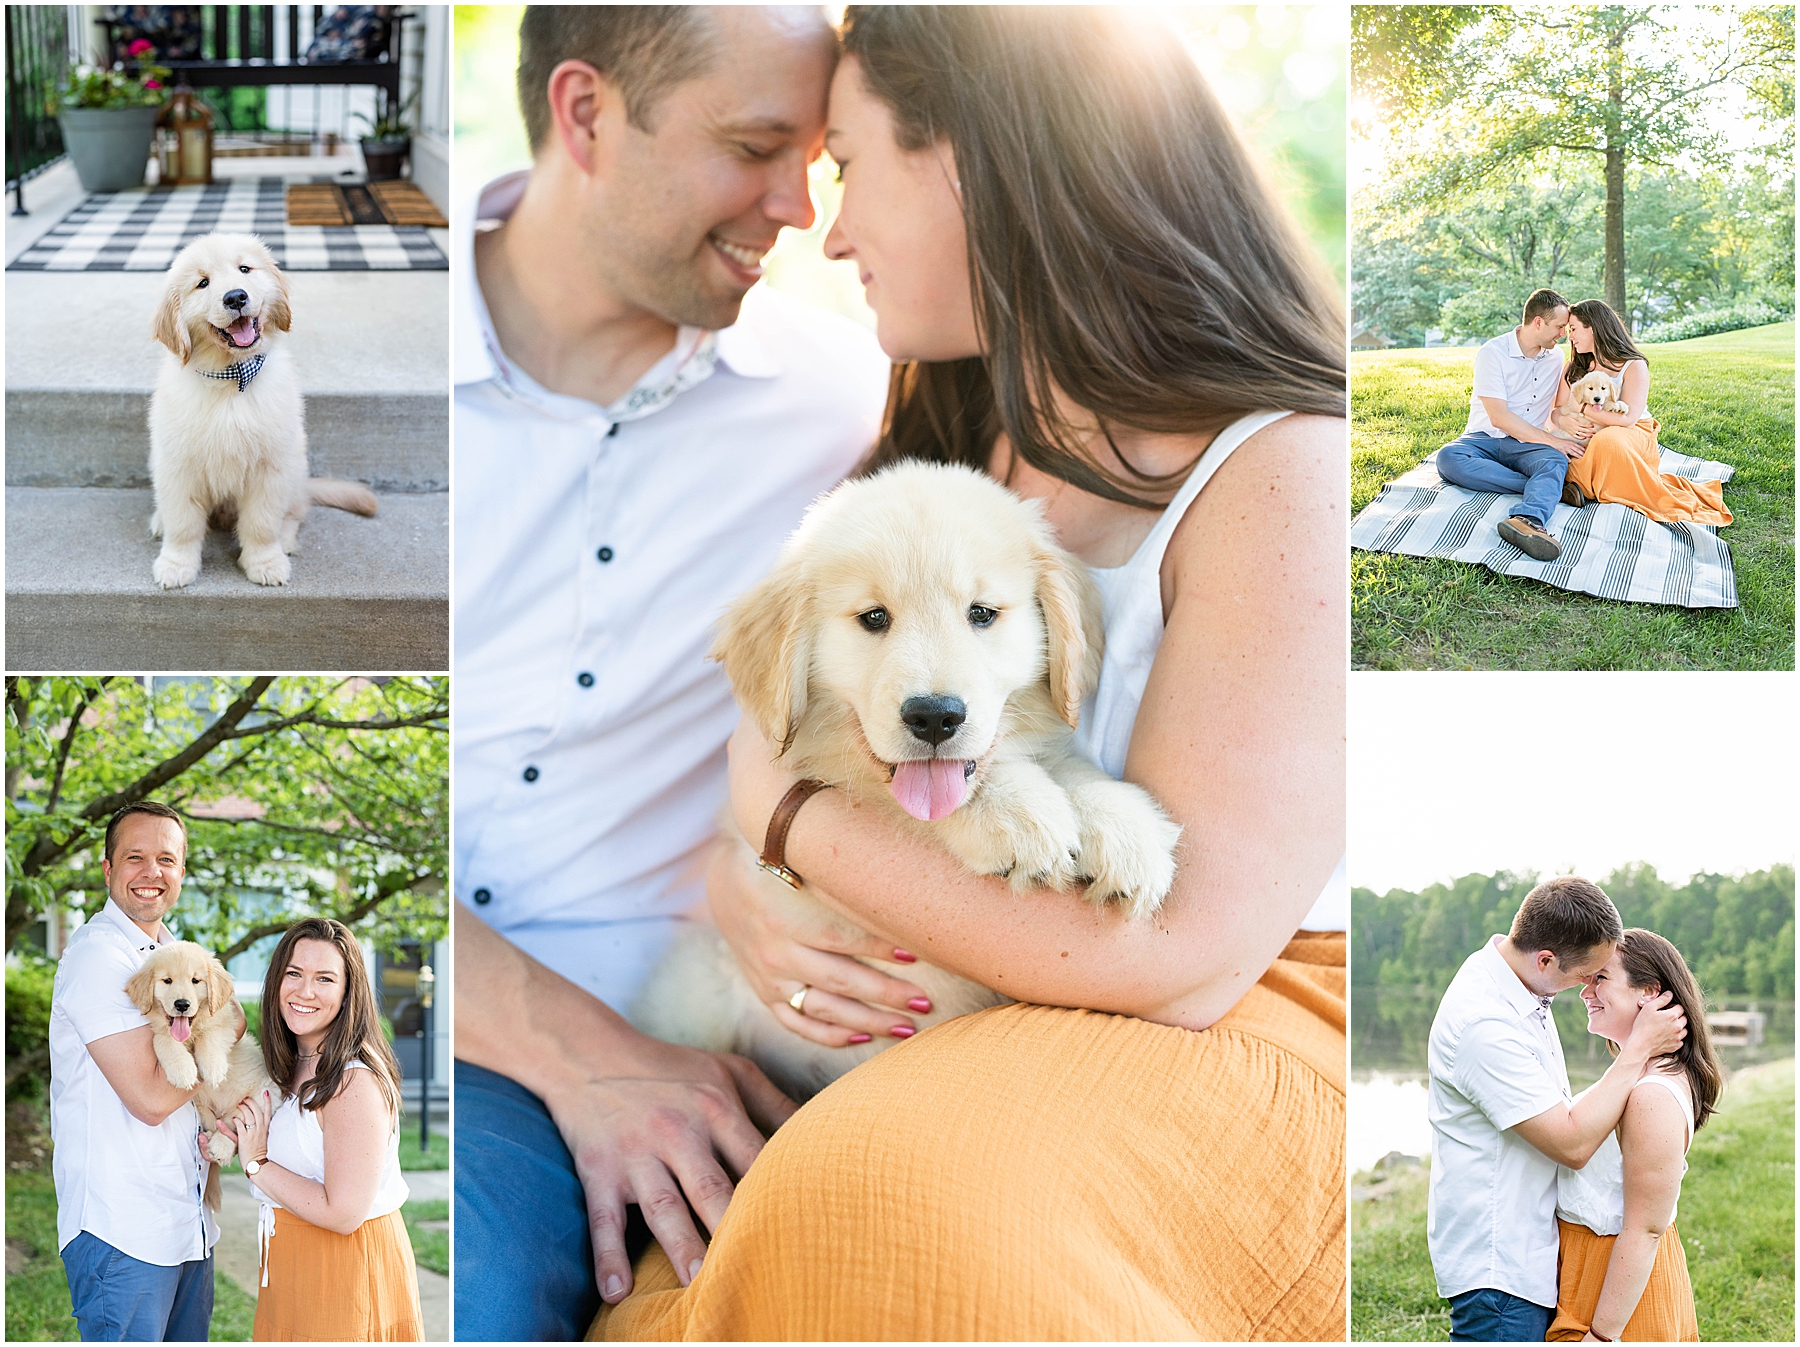 New Puppy Photo Session in Northern Virginia